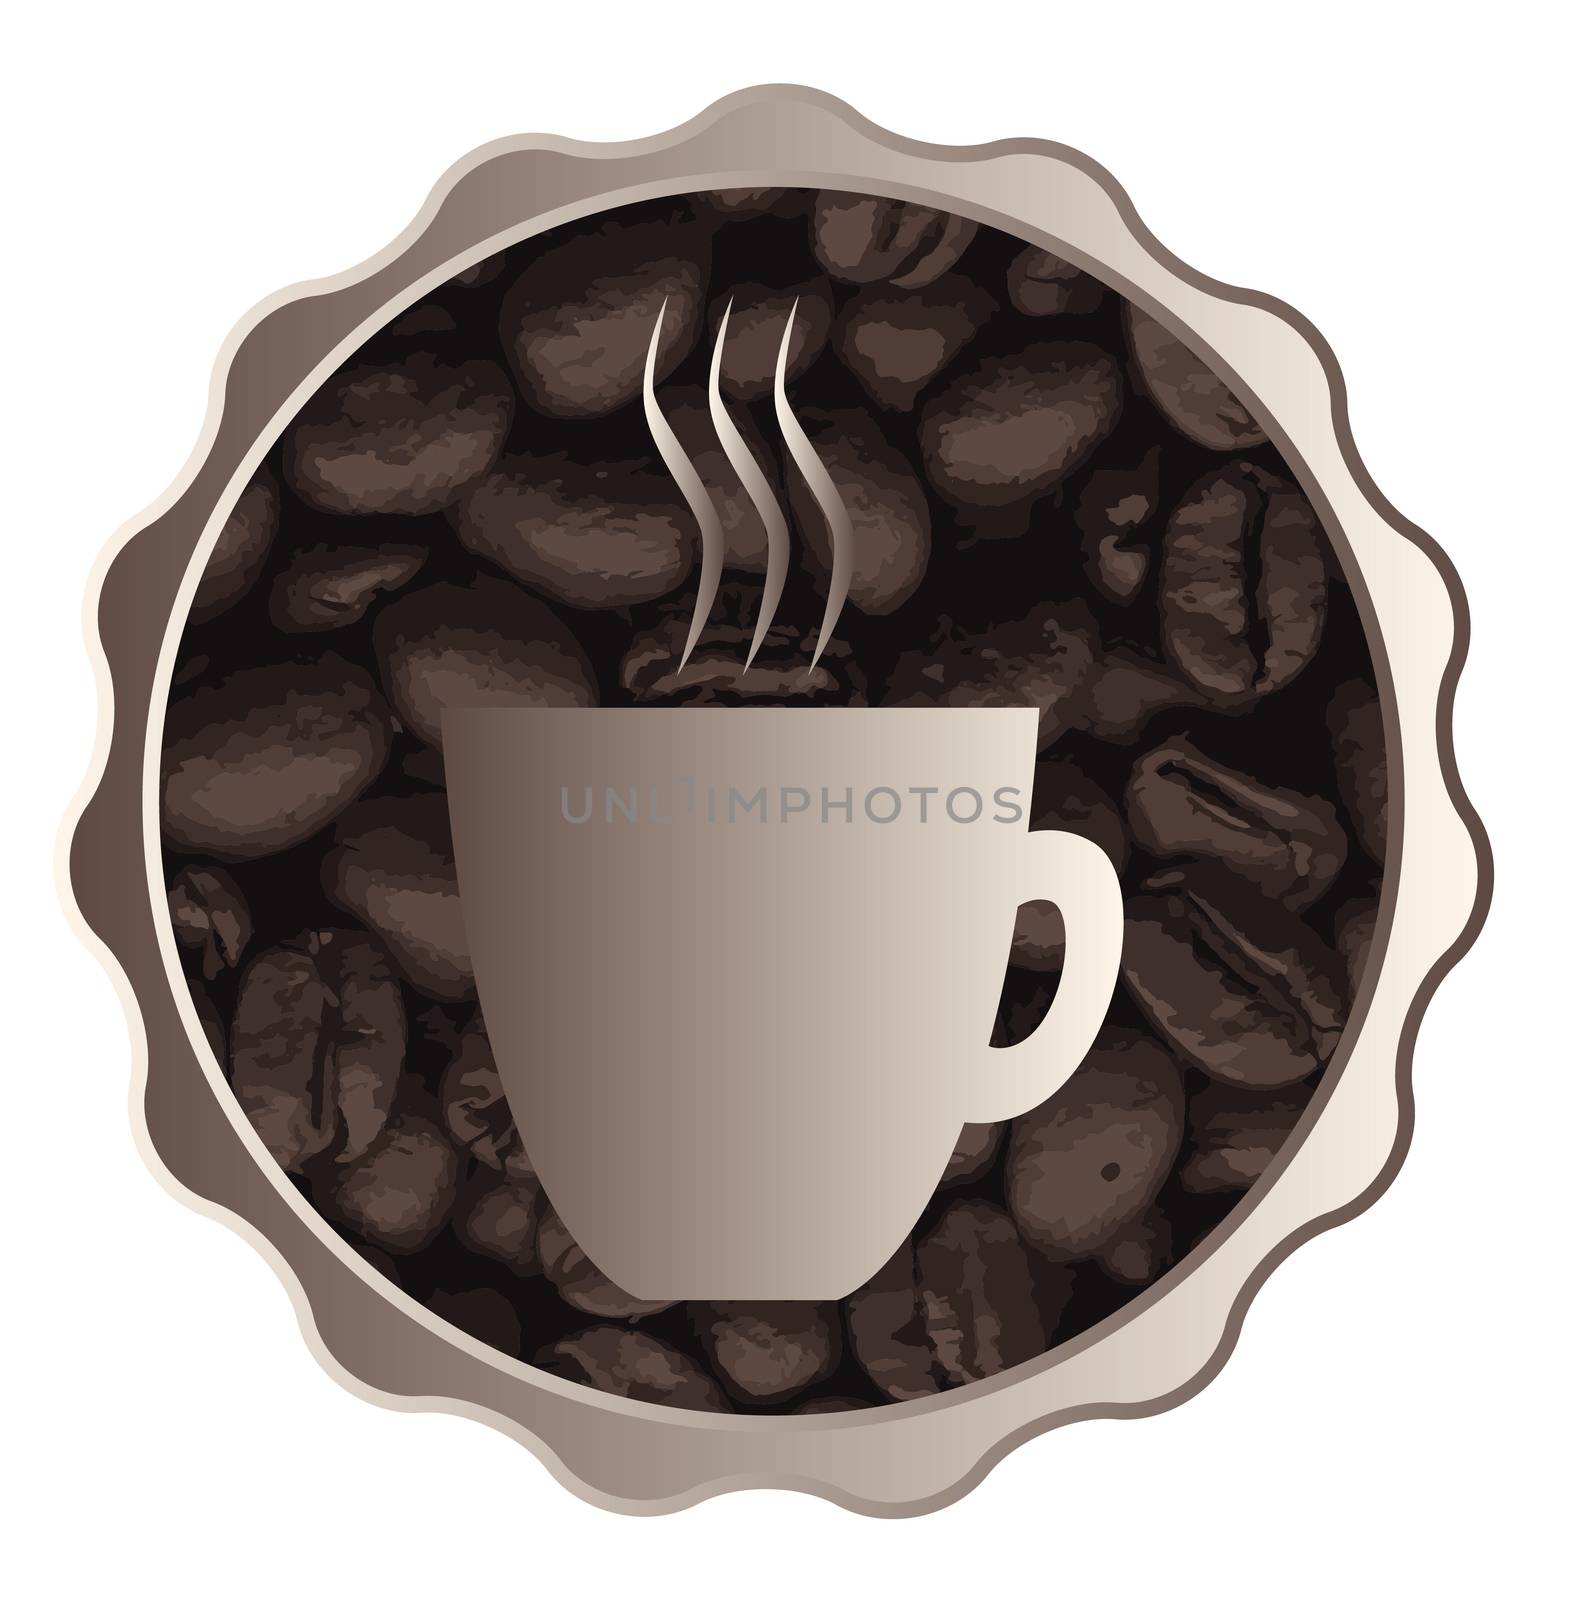 A collection of fresh coffee beans with a graphic design cup image